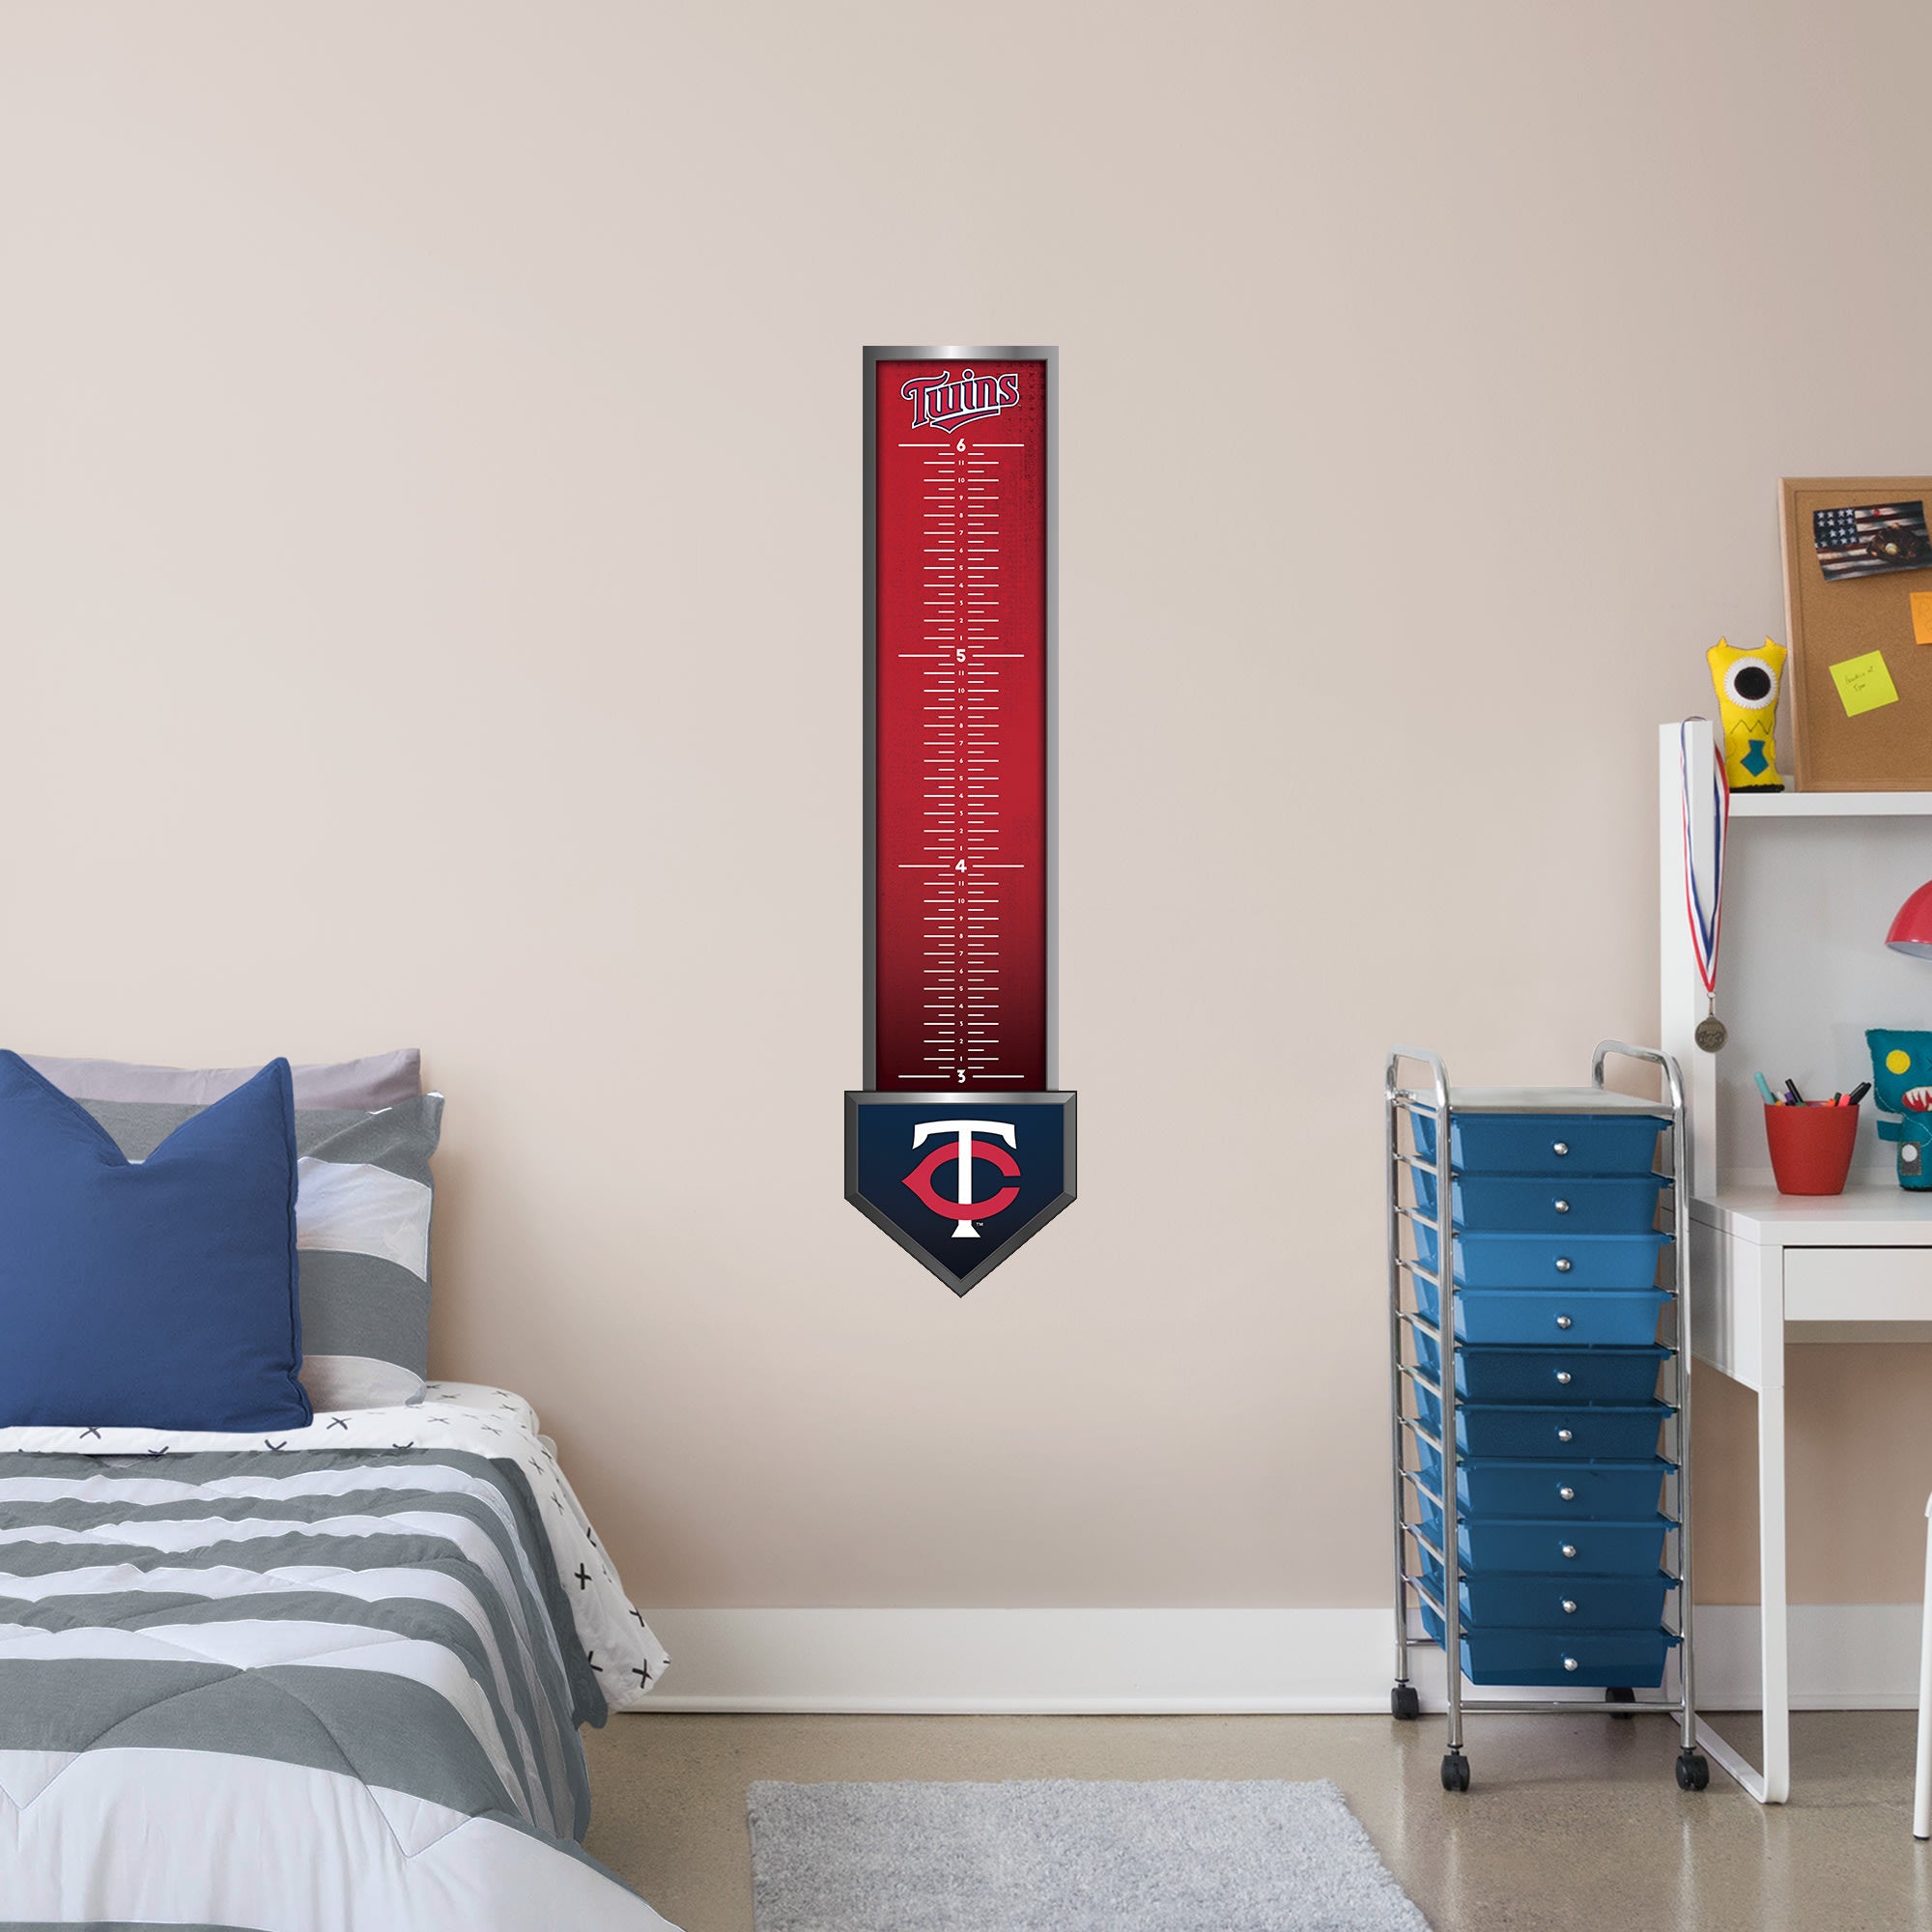 Minnesota Twins: Growth Chart - Officially Licensed MLB Removable Wall Graphic 13.0"W x 54.0"H by Fathead | Vinyl